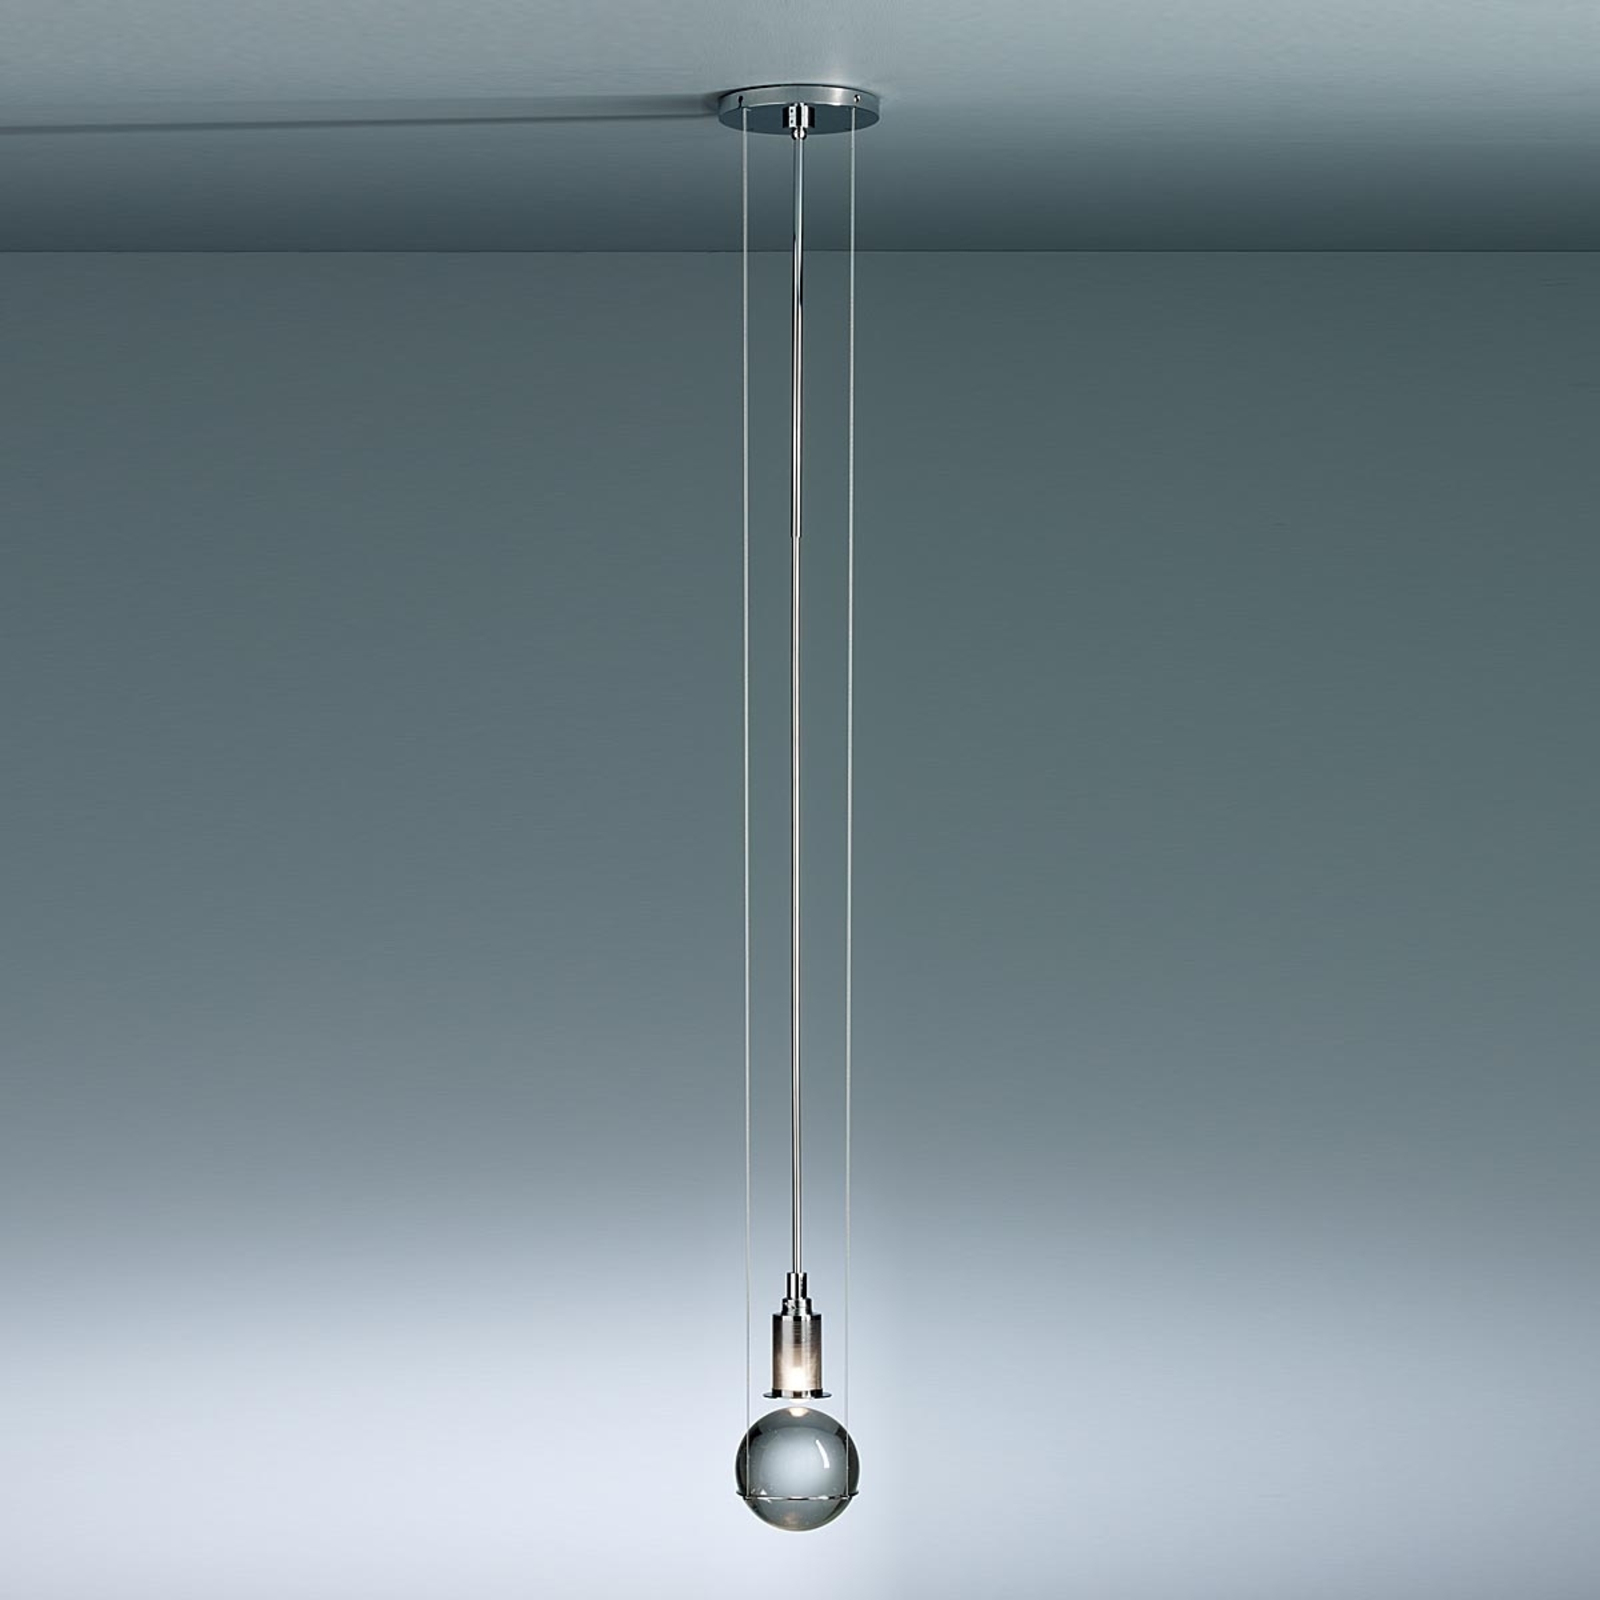 Design-hanglamp LE TRE STREGHE, messing